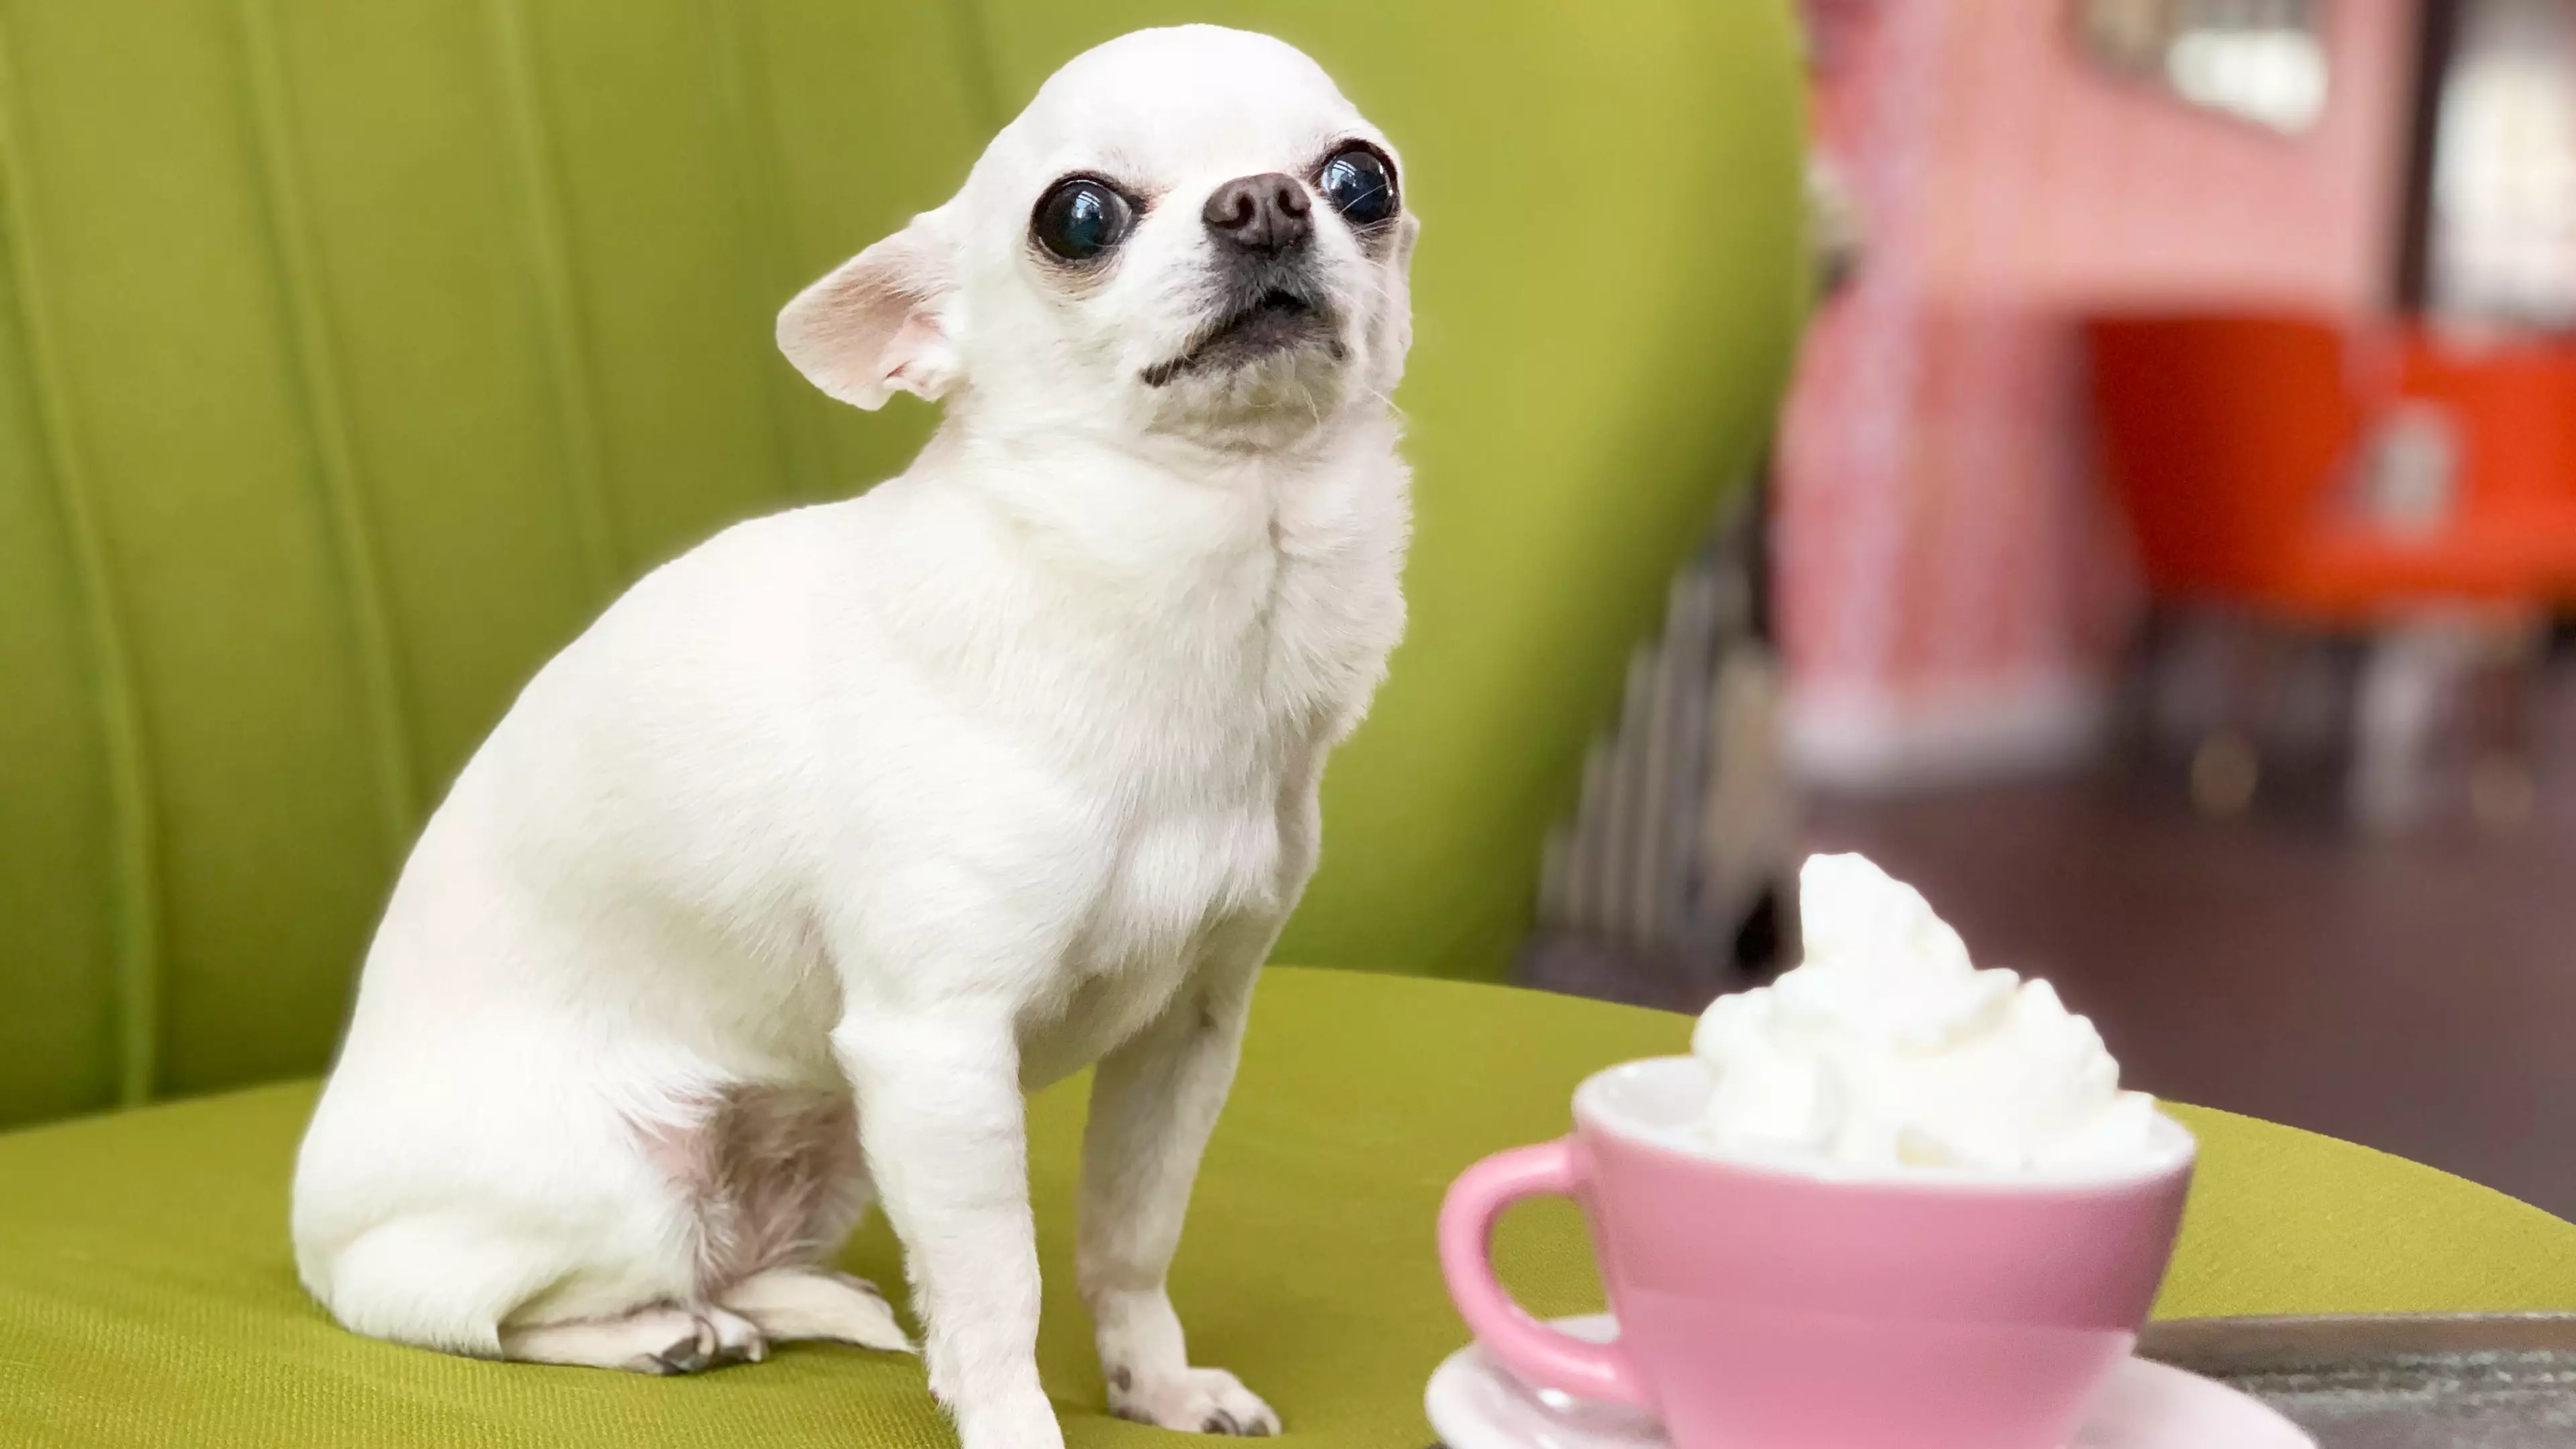 Attention, Dog Lovers: A Chihuahua Café Is Coming To The UK